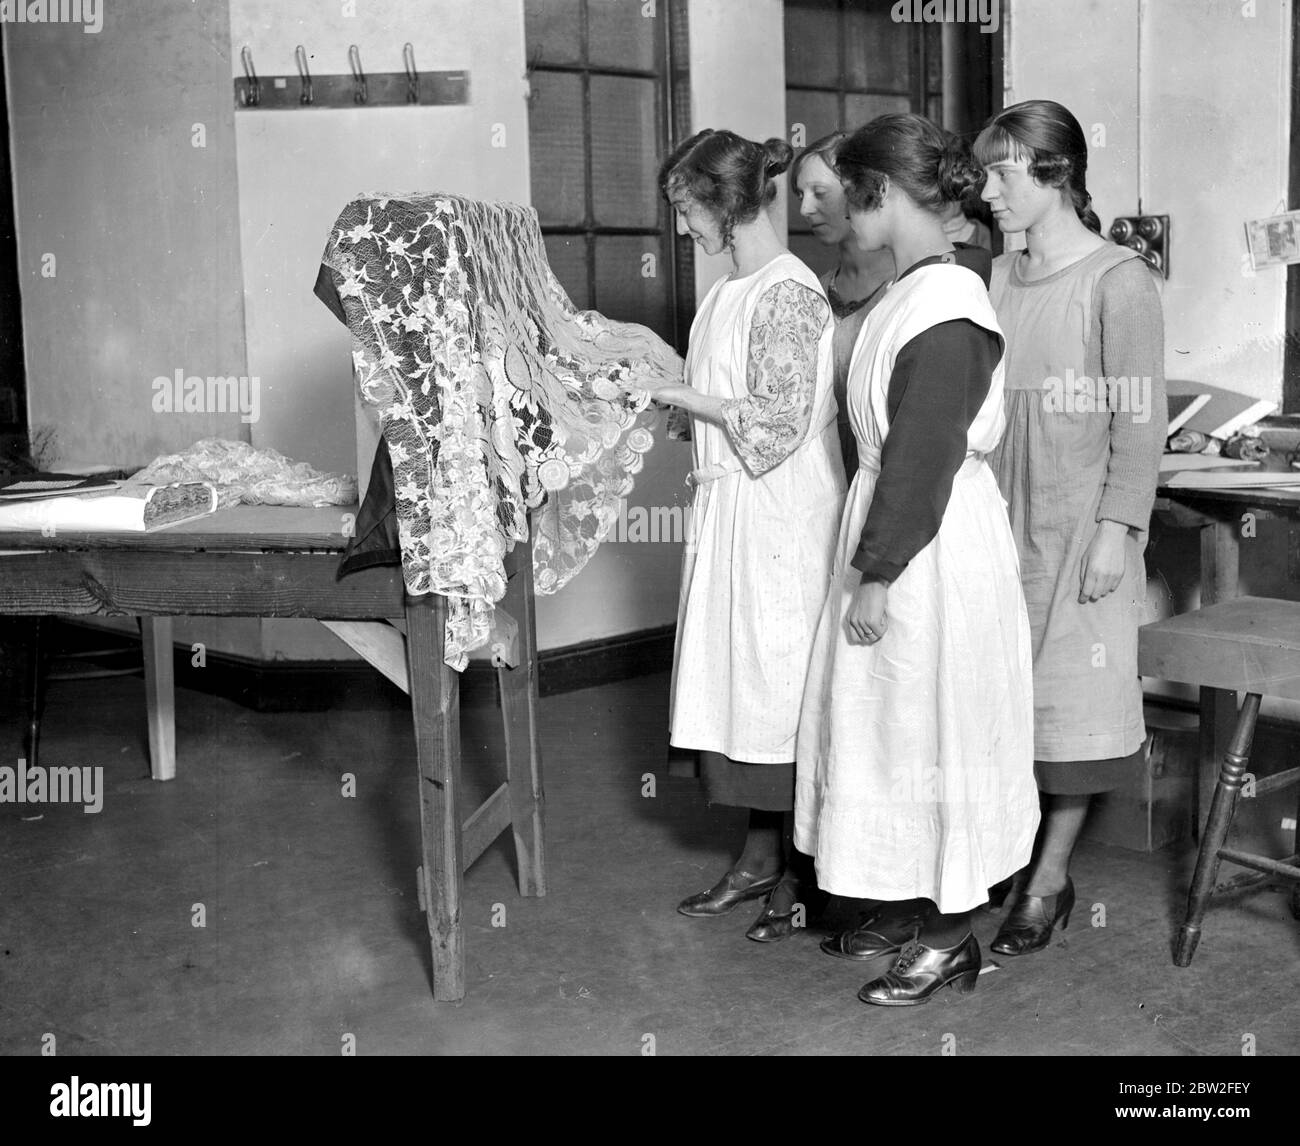 Lace making at messrs William Bridgett and Sons Ltd, Lenton, Nottingham. Work girls inspecting the finished lace. 1923 Stock Photo